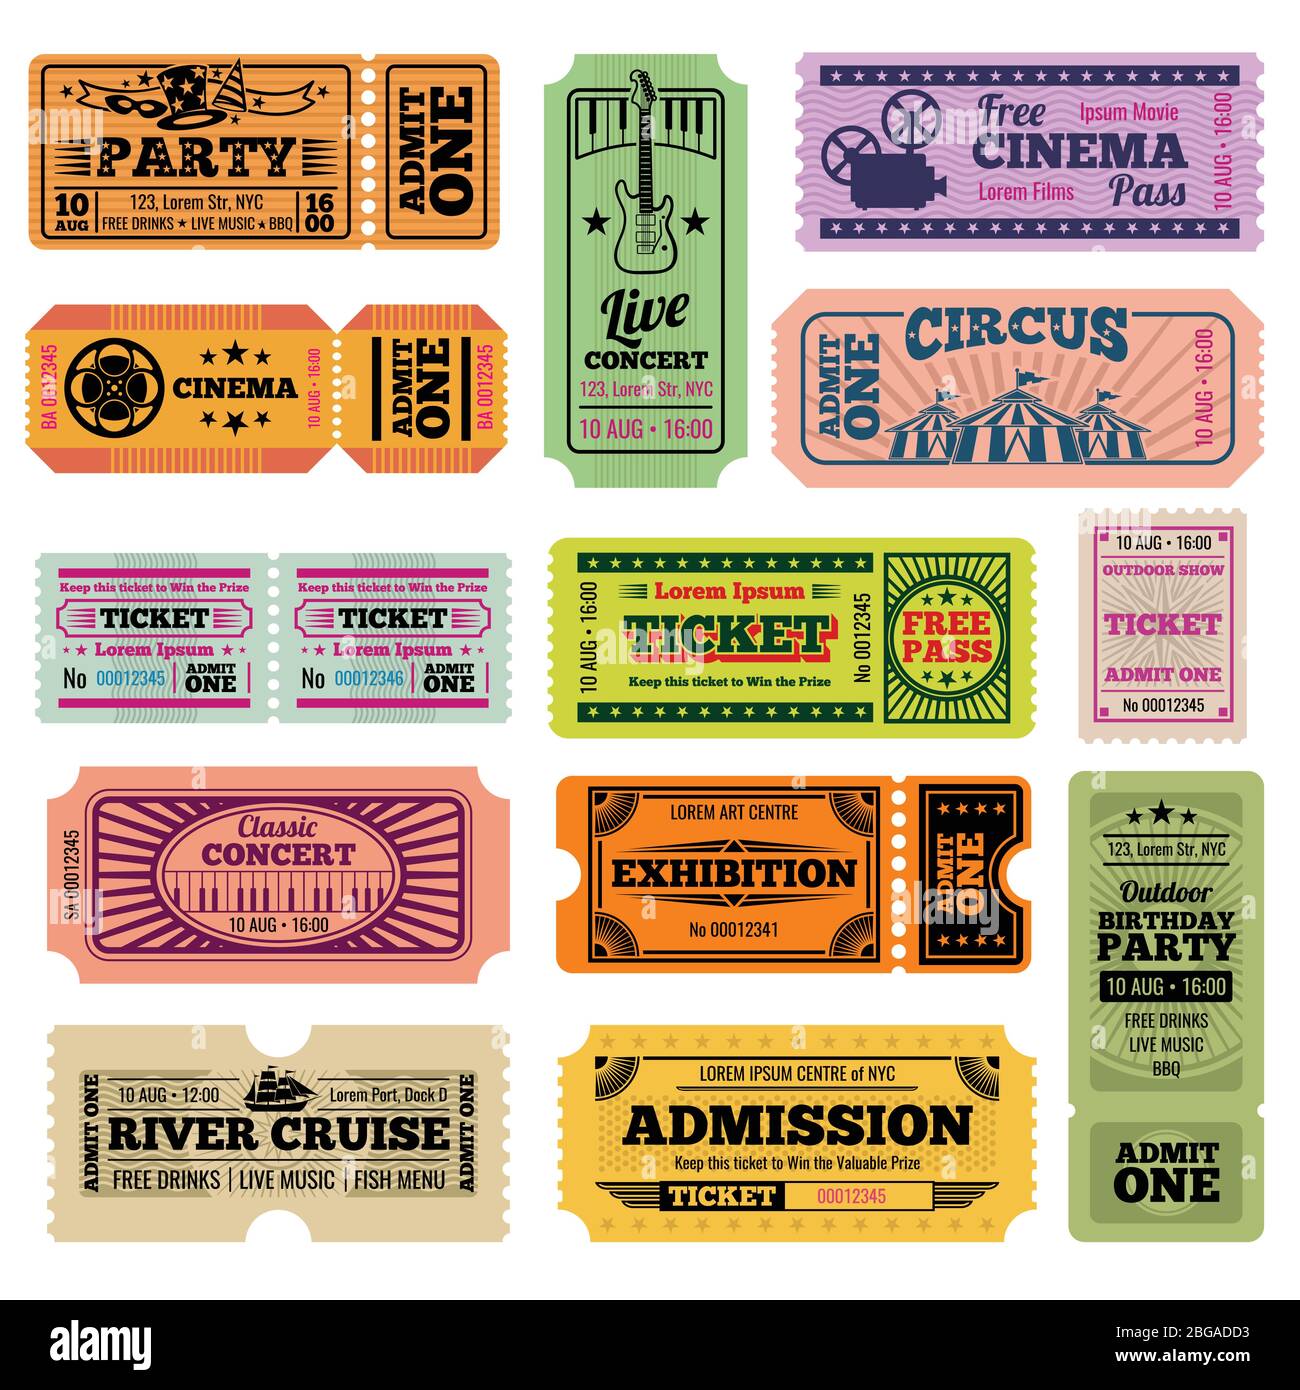 Retro party, cinema, movie and music event vector passing tickets set. Ticket to theater and music concert illustration Stock Vector